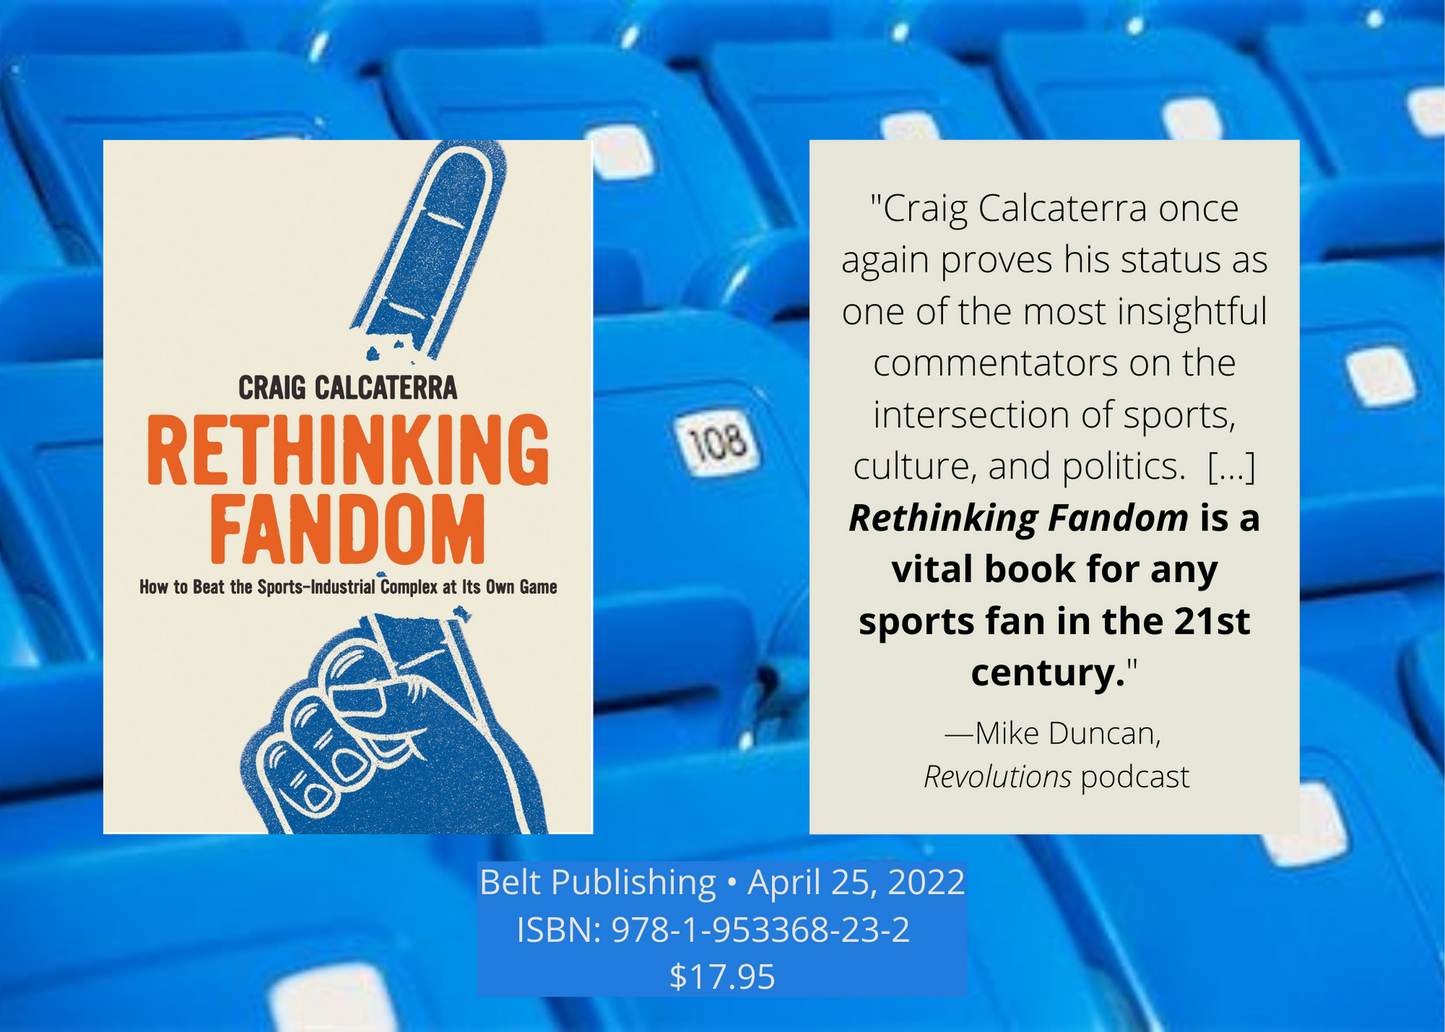 Rethinking Fandom: How to Beat the Sports-Industrial Complex at Its Own Game